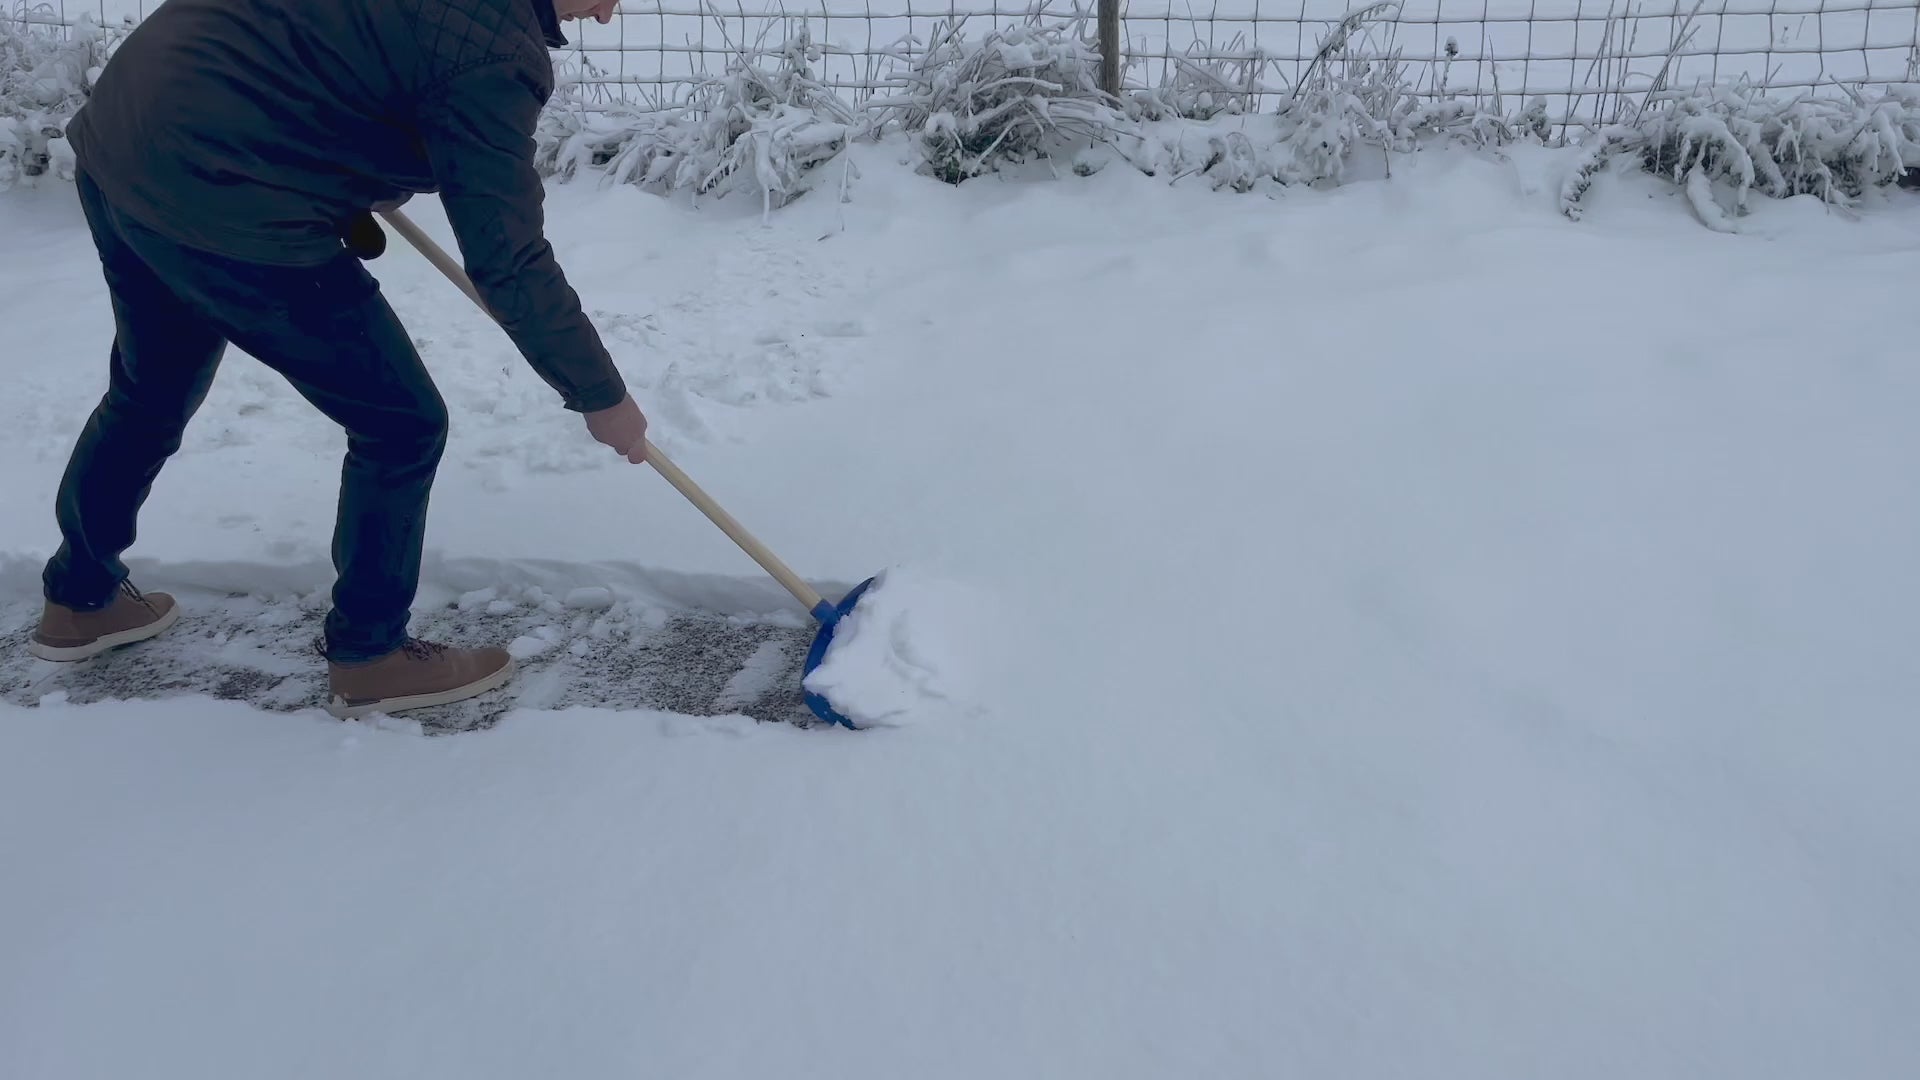 A man shovelling snow in front of a fence with a blue shovel.